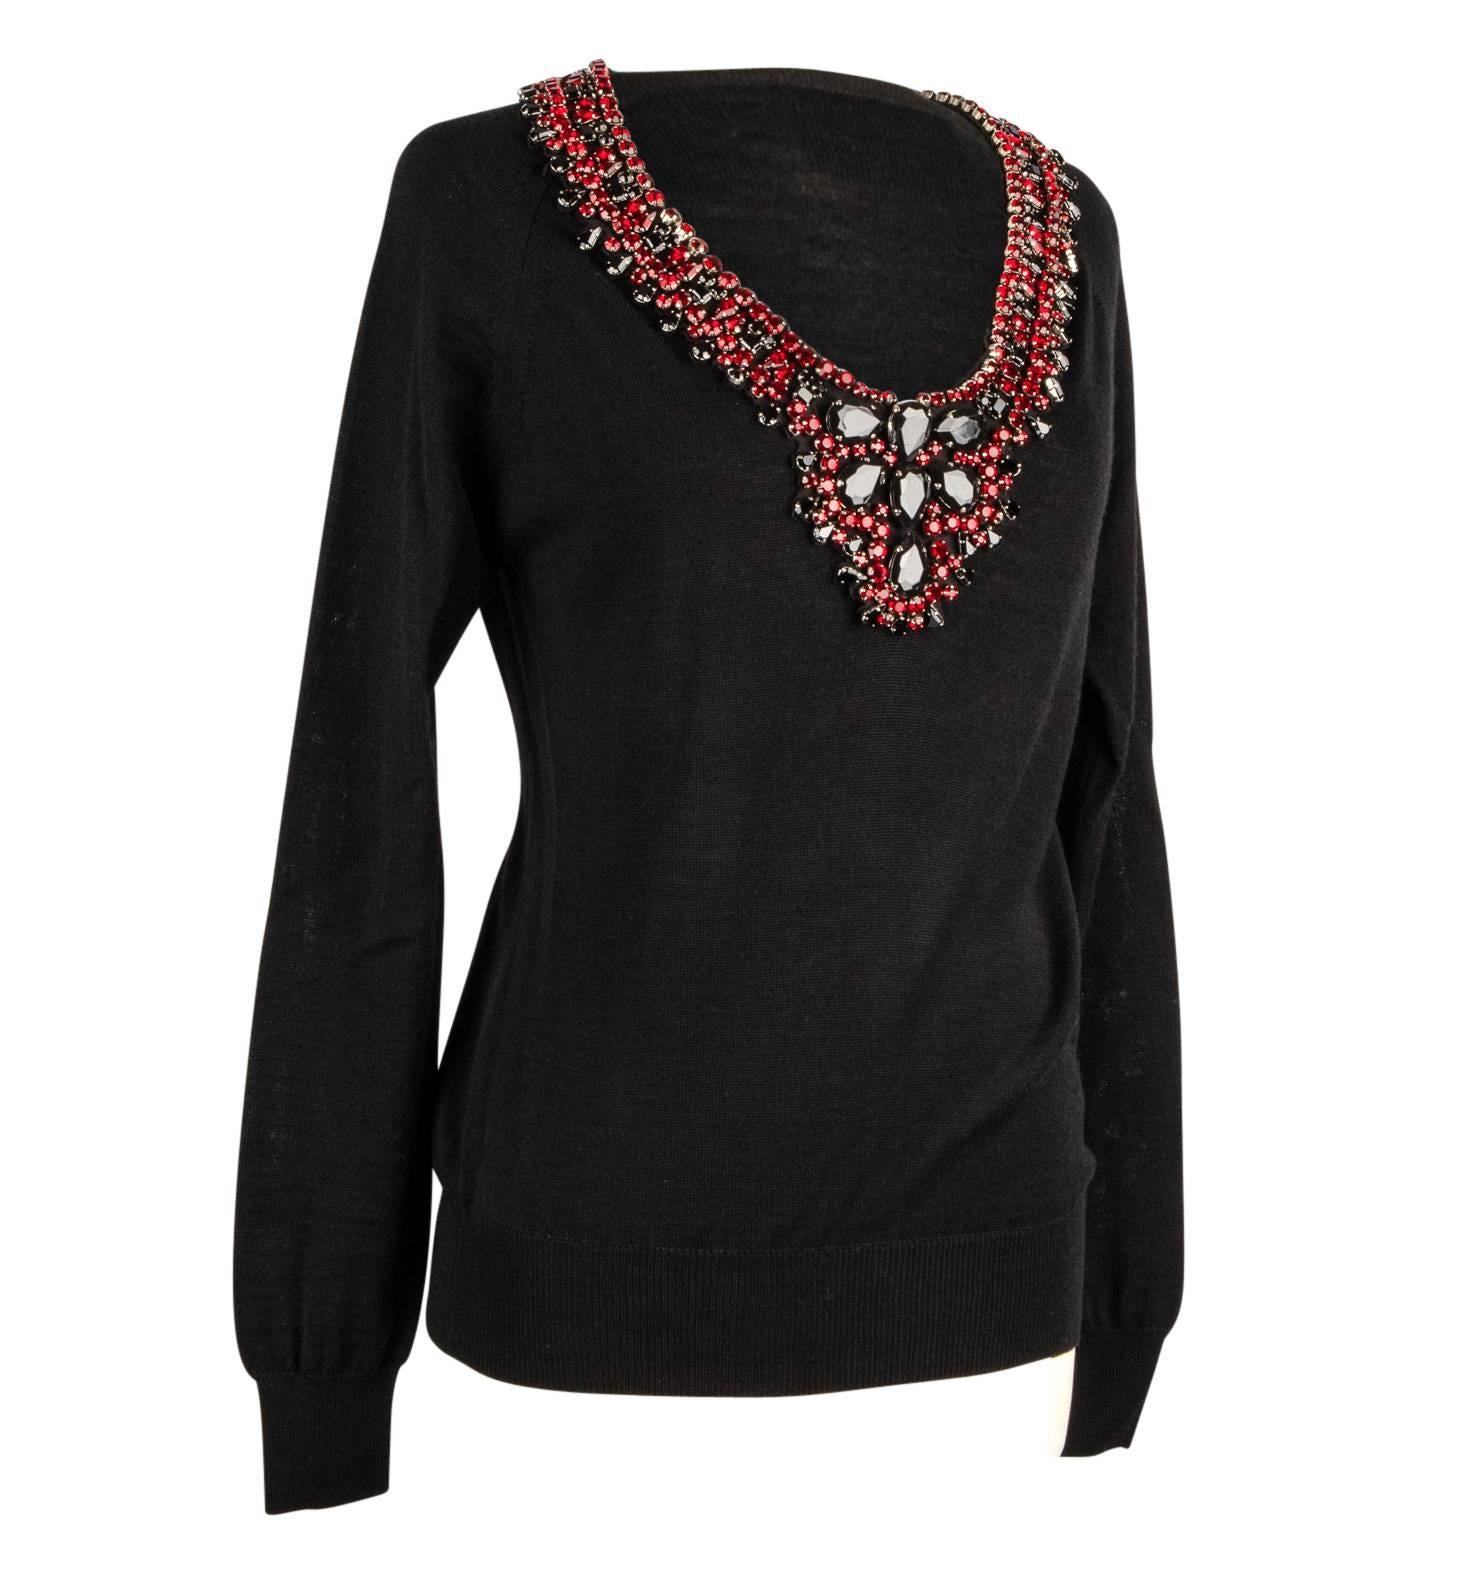 Guaranteed authentic Philipp Plein Couture jet black jeweled sweater. 
Rounded V neck encrusted with faceted stones of black and red in various sizes and shapes.
Dramatic effect!
Light weight classic knit top.
Fabric is wool and acrylic.
final